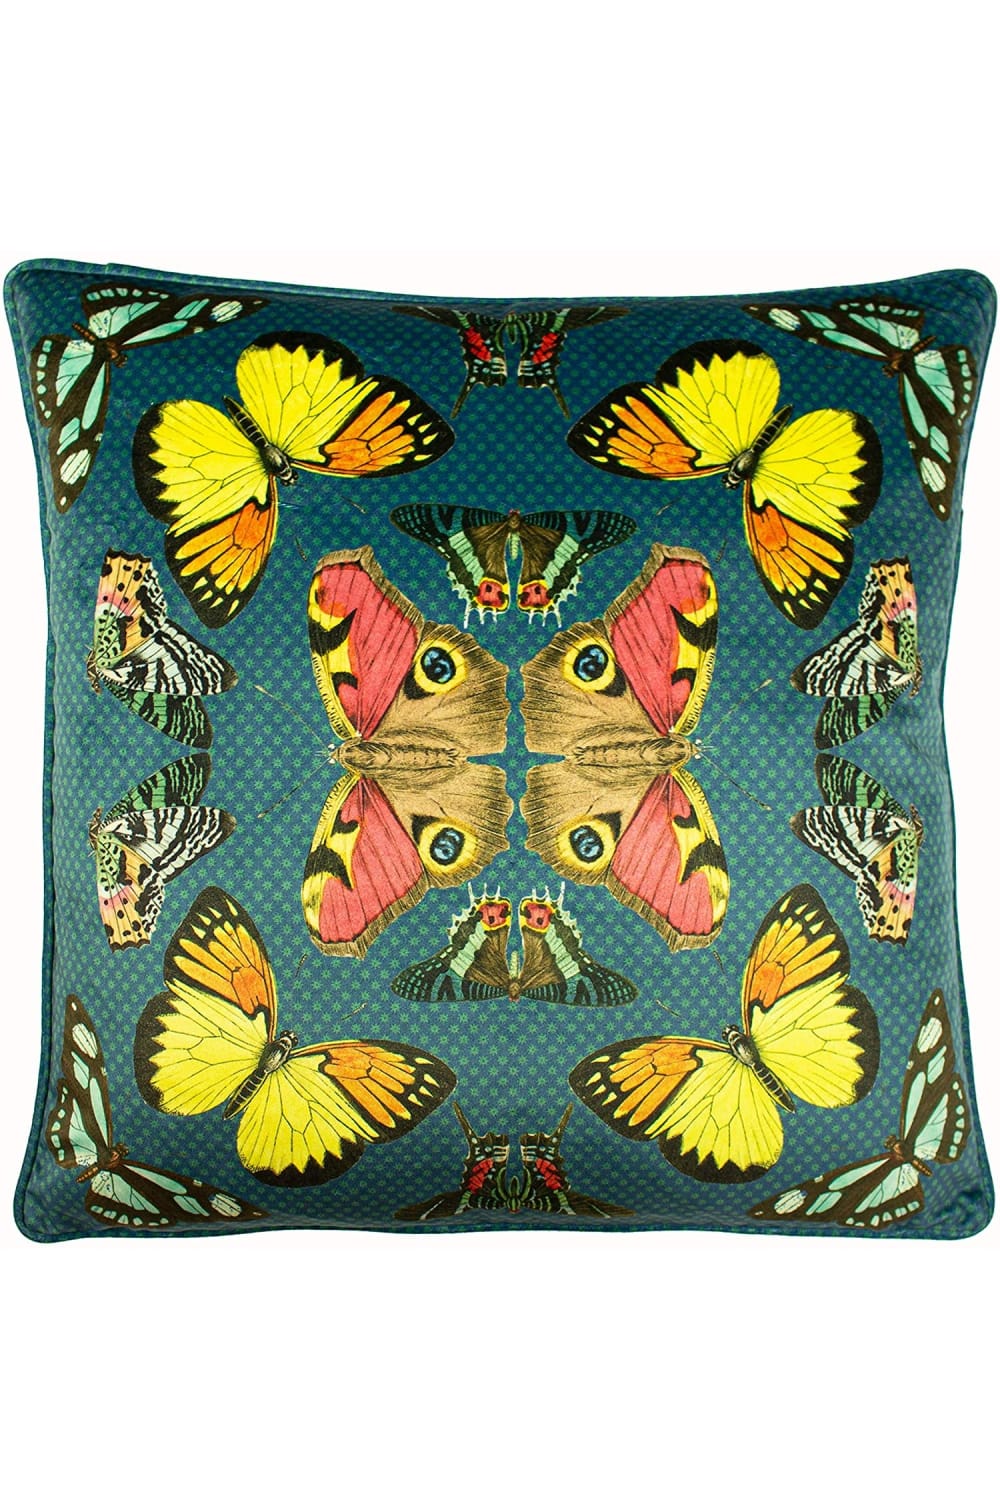 Paoletti Butterfly Cushion Cover (Teal) (One Size)